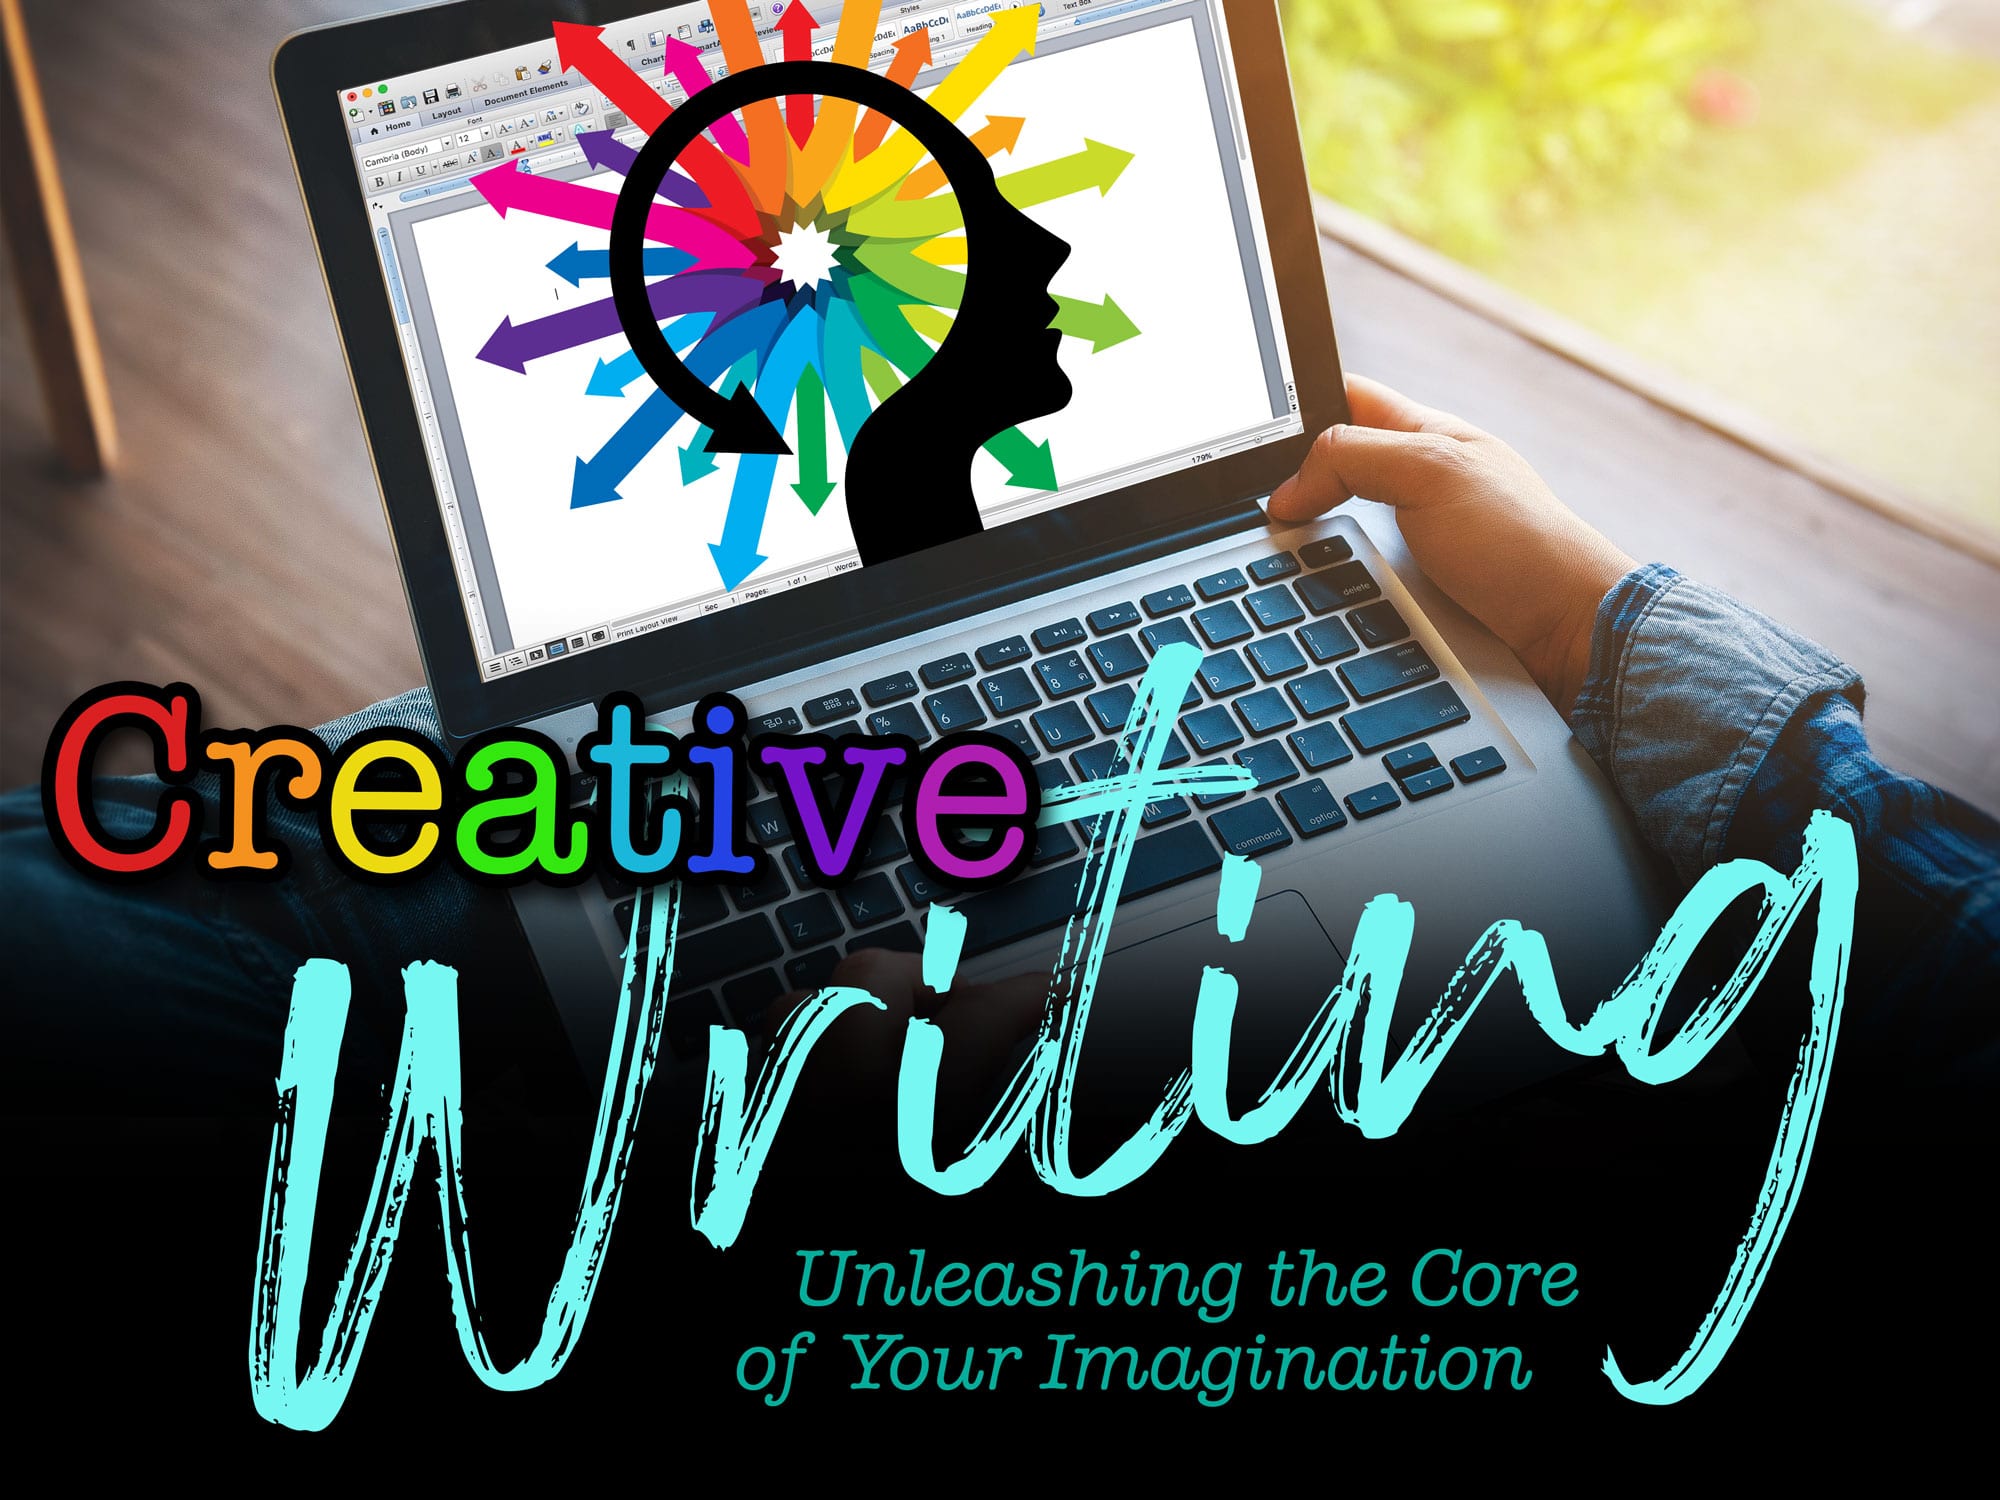 Creative Writing: Unleashing the Core of Your Imagination - eDynamic Learning